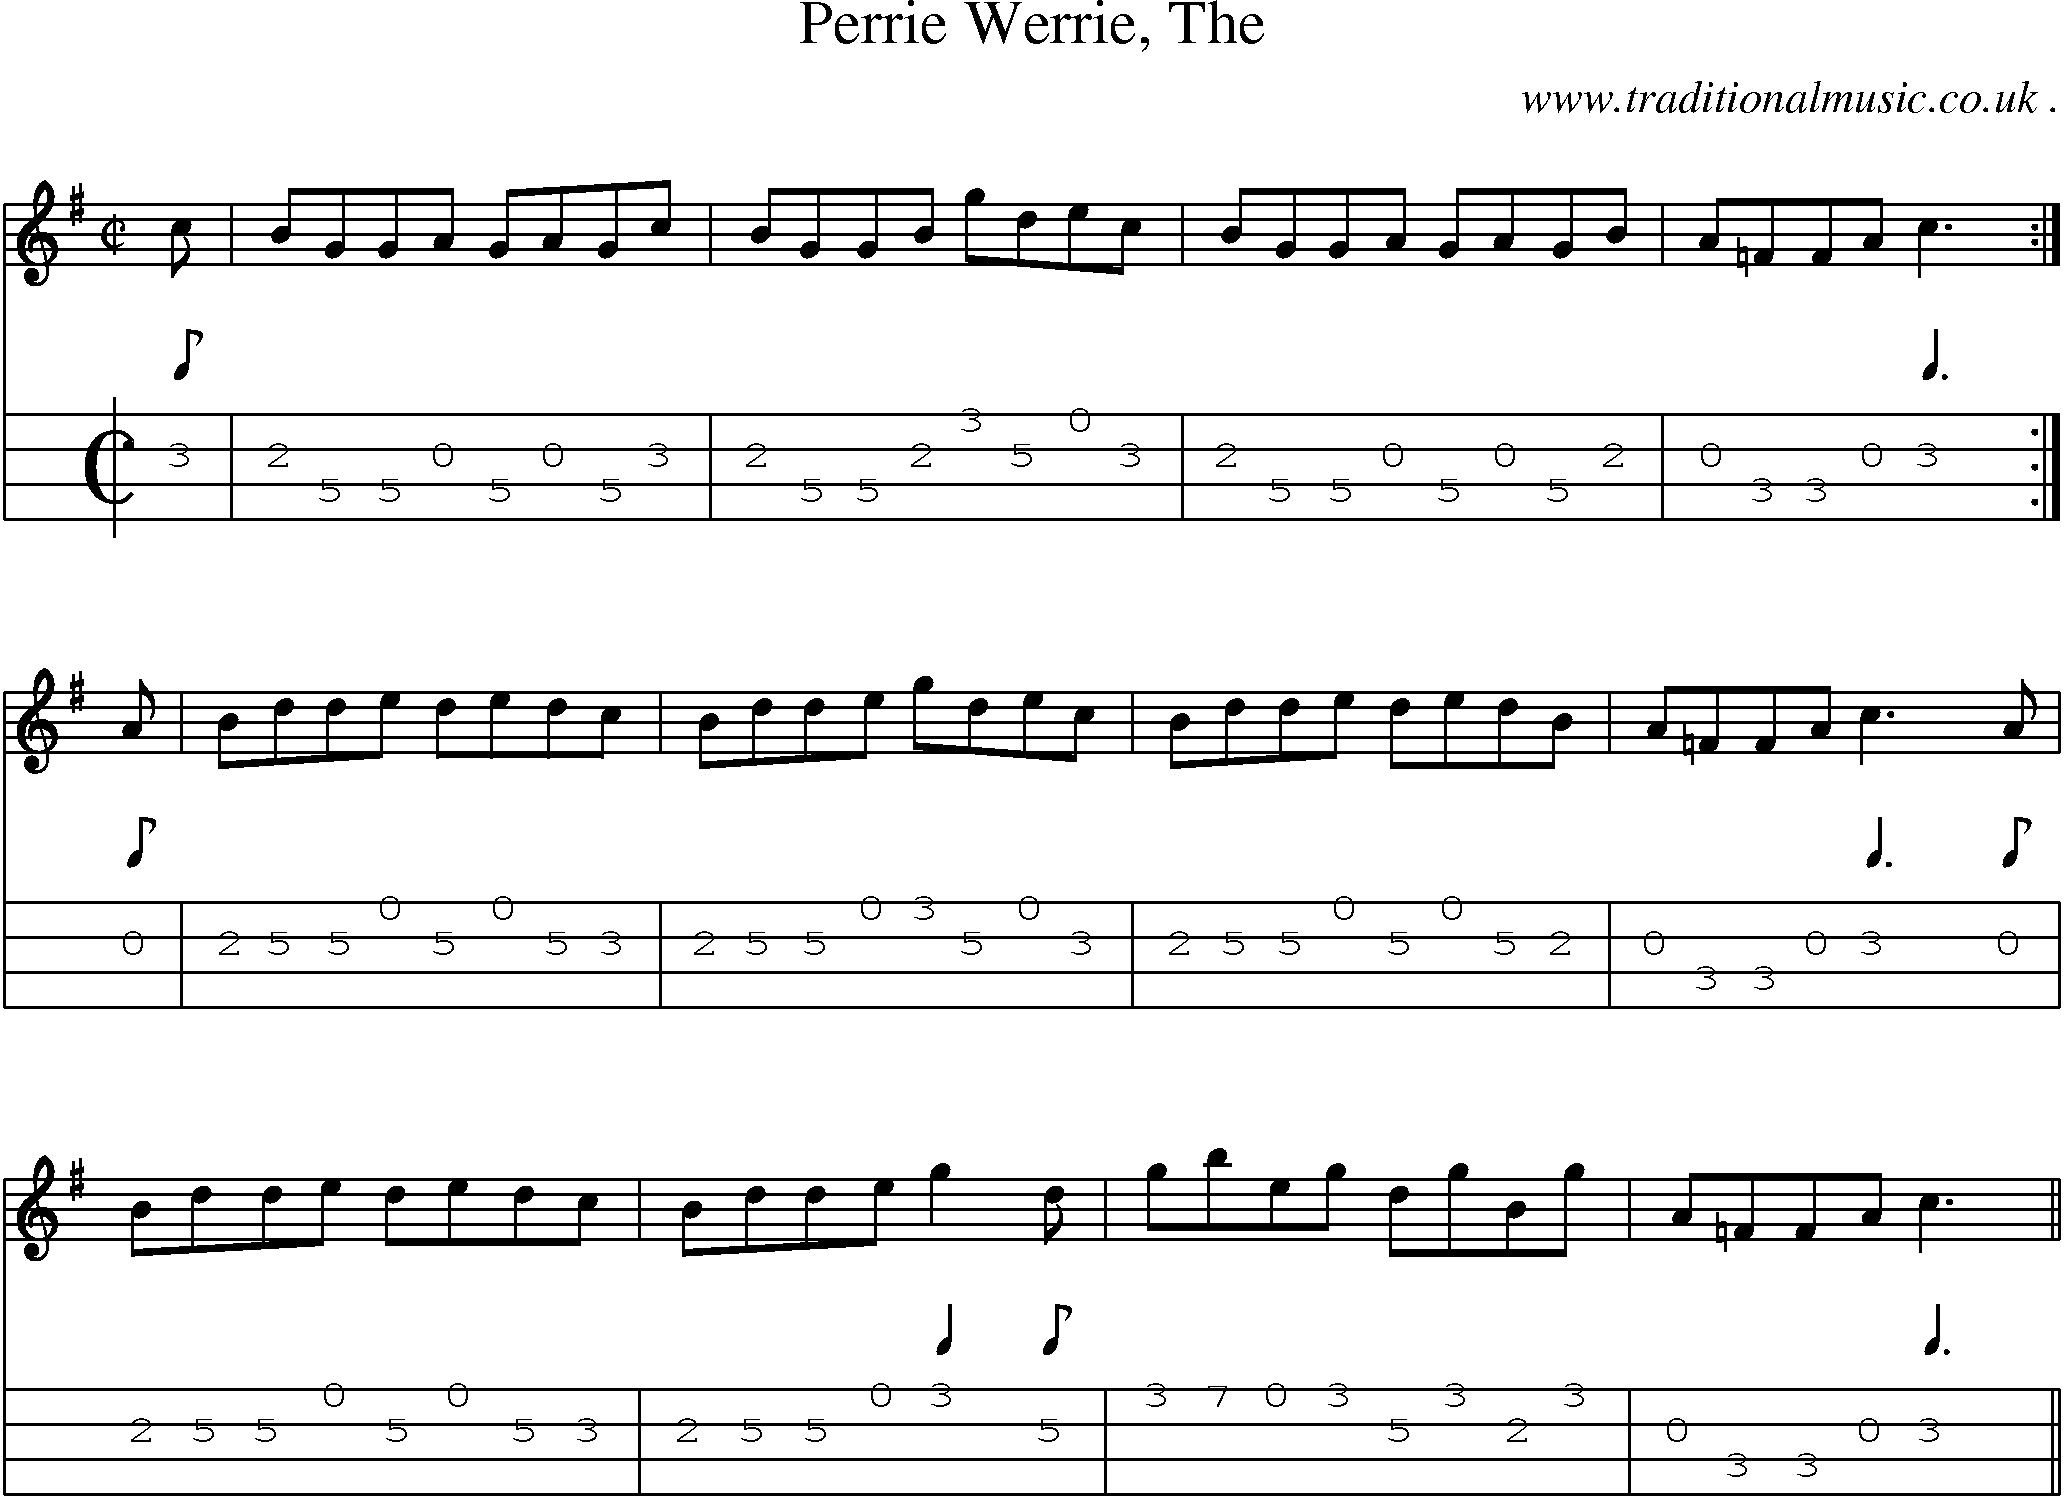 Sheet-music  score, Chords and Mandolin Tabs for Perrie Werrie The